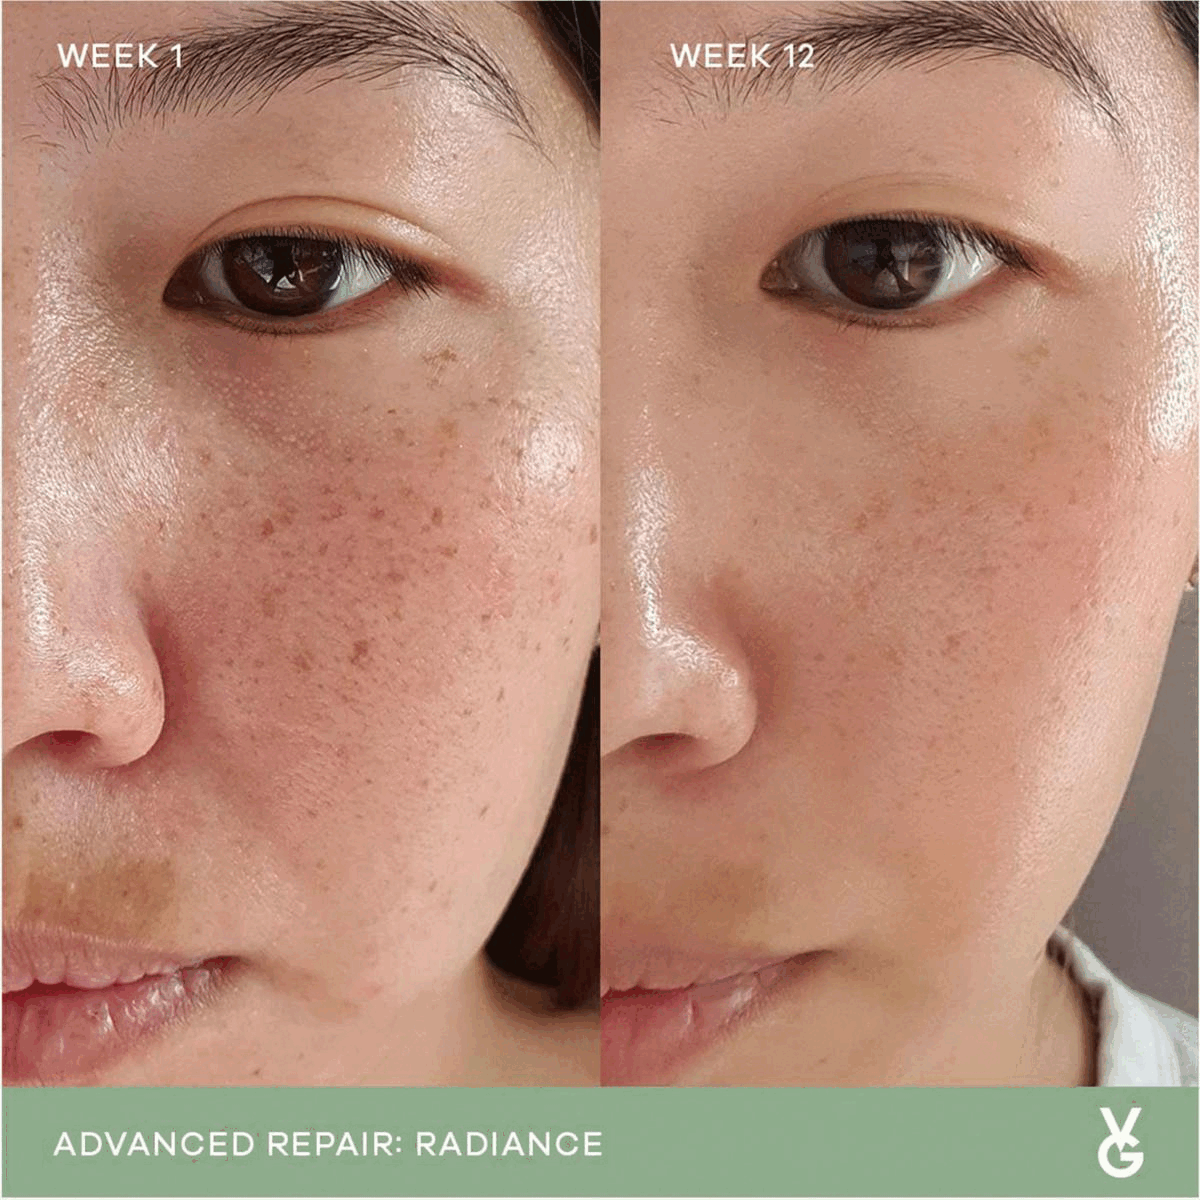 Image 1-2, week 1 vs week 12. Advanced Repair: Radiance. Image 3, 100% Marine Collagen, reduces fine lines and wrinkles, promotes healthy hair and nails, firms and plumps skin, improves elasticity.